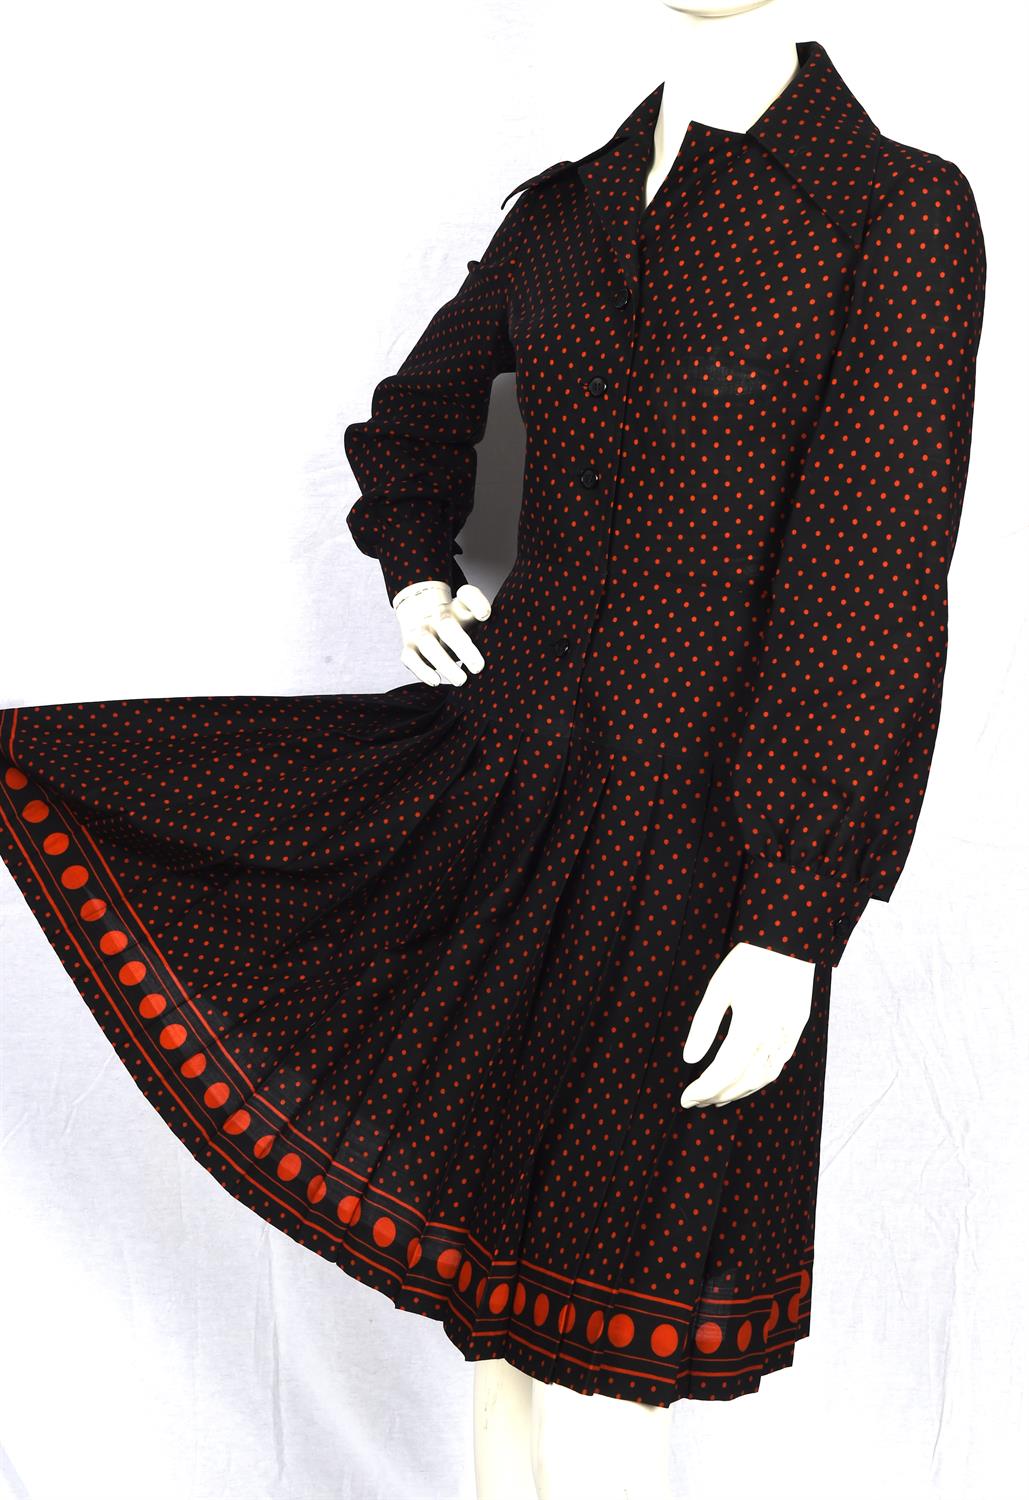 CHRISTIAN DIOR DIORLING 1970s lined wool pleated button-down shirt-waister dress in black and red - Image 4 of 5